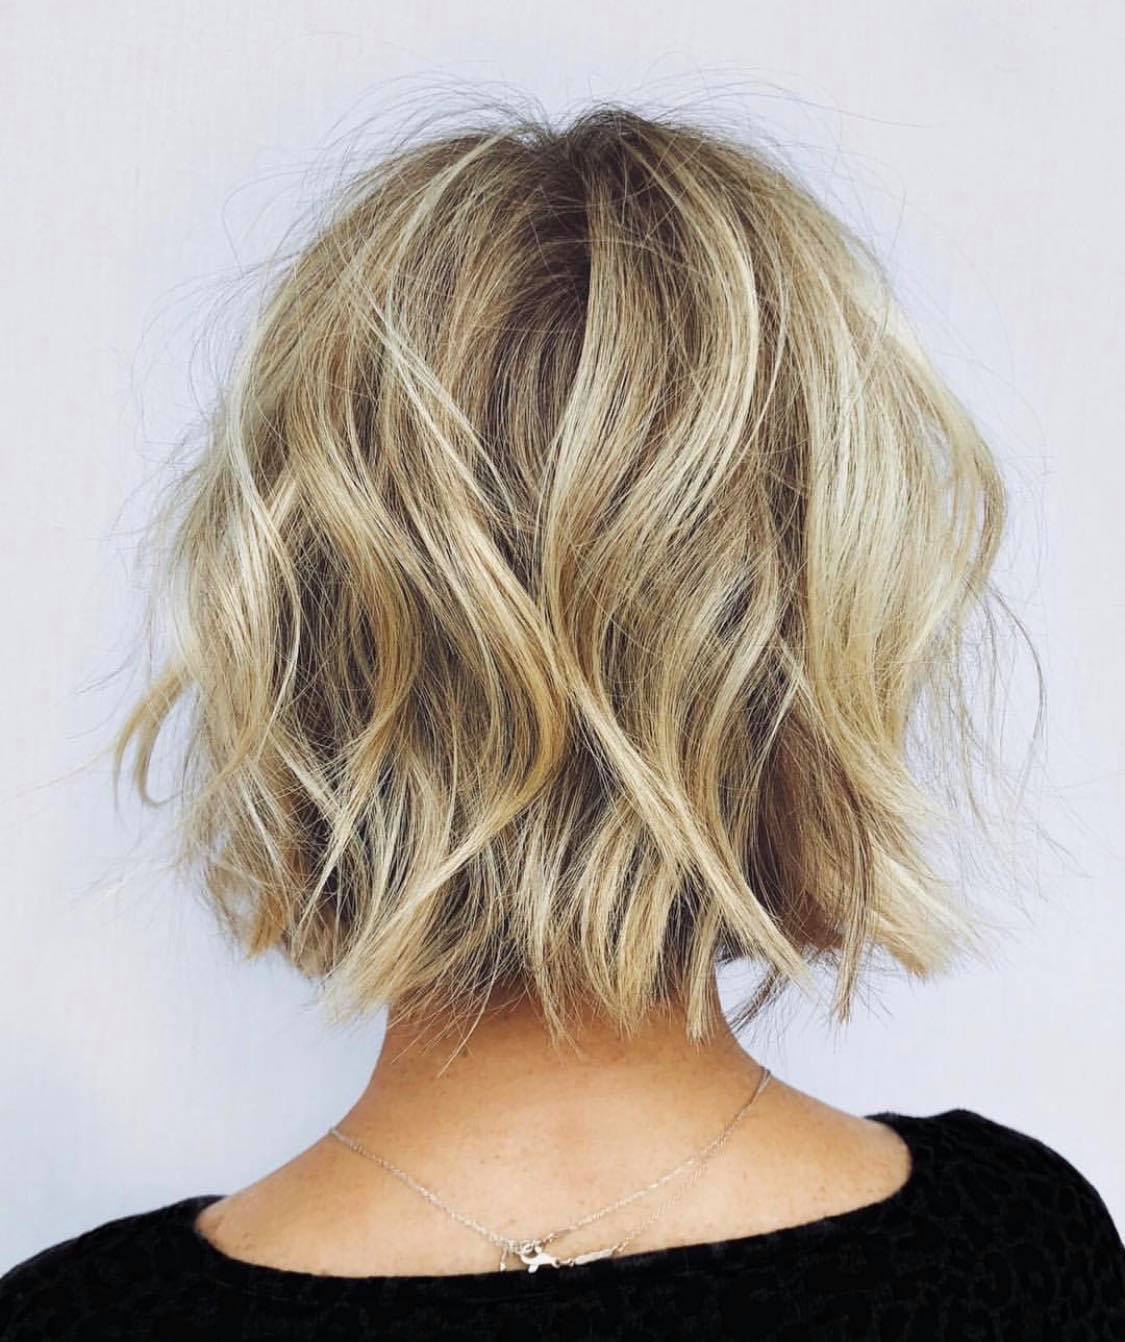 These Hairstyles Will Take Years Off Your Face - Beautiful Trends Today ...